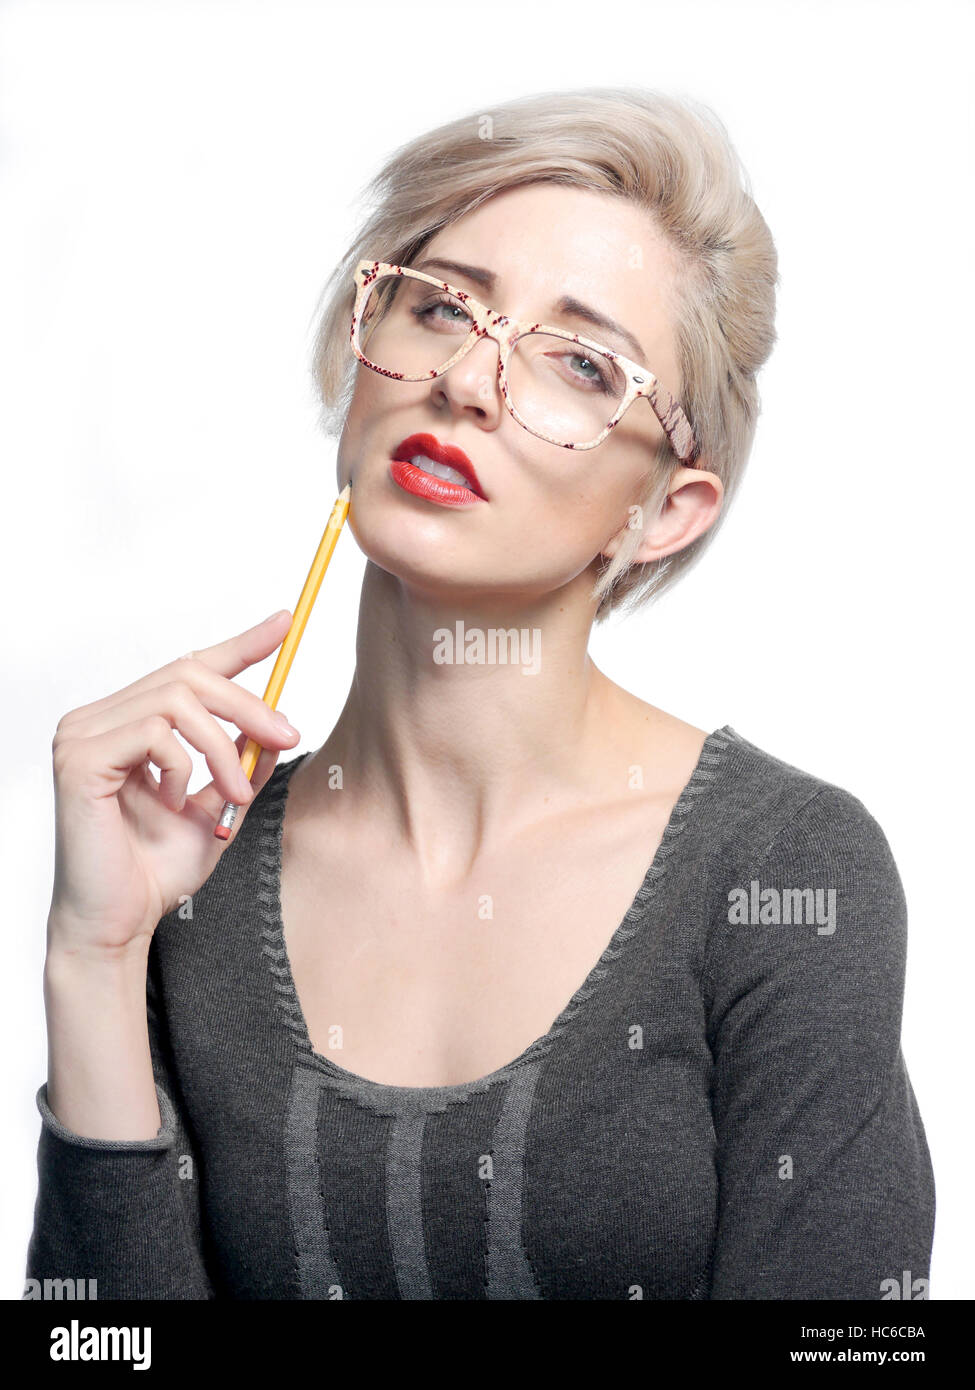 A attractive blonde haired woman is holding a yellow pencil and wearing glasses. Stock Photo